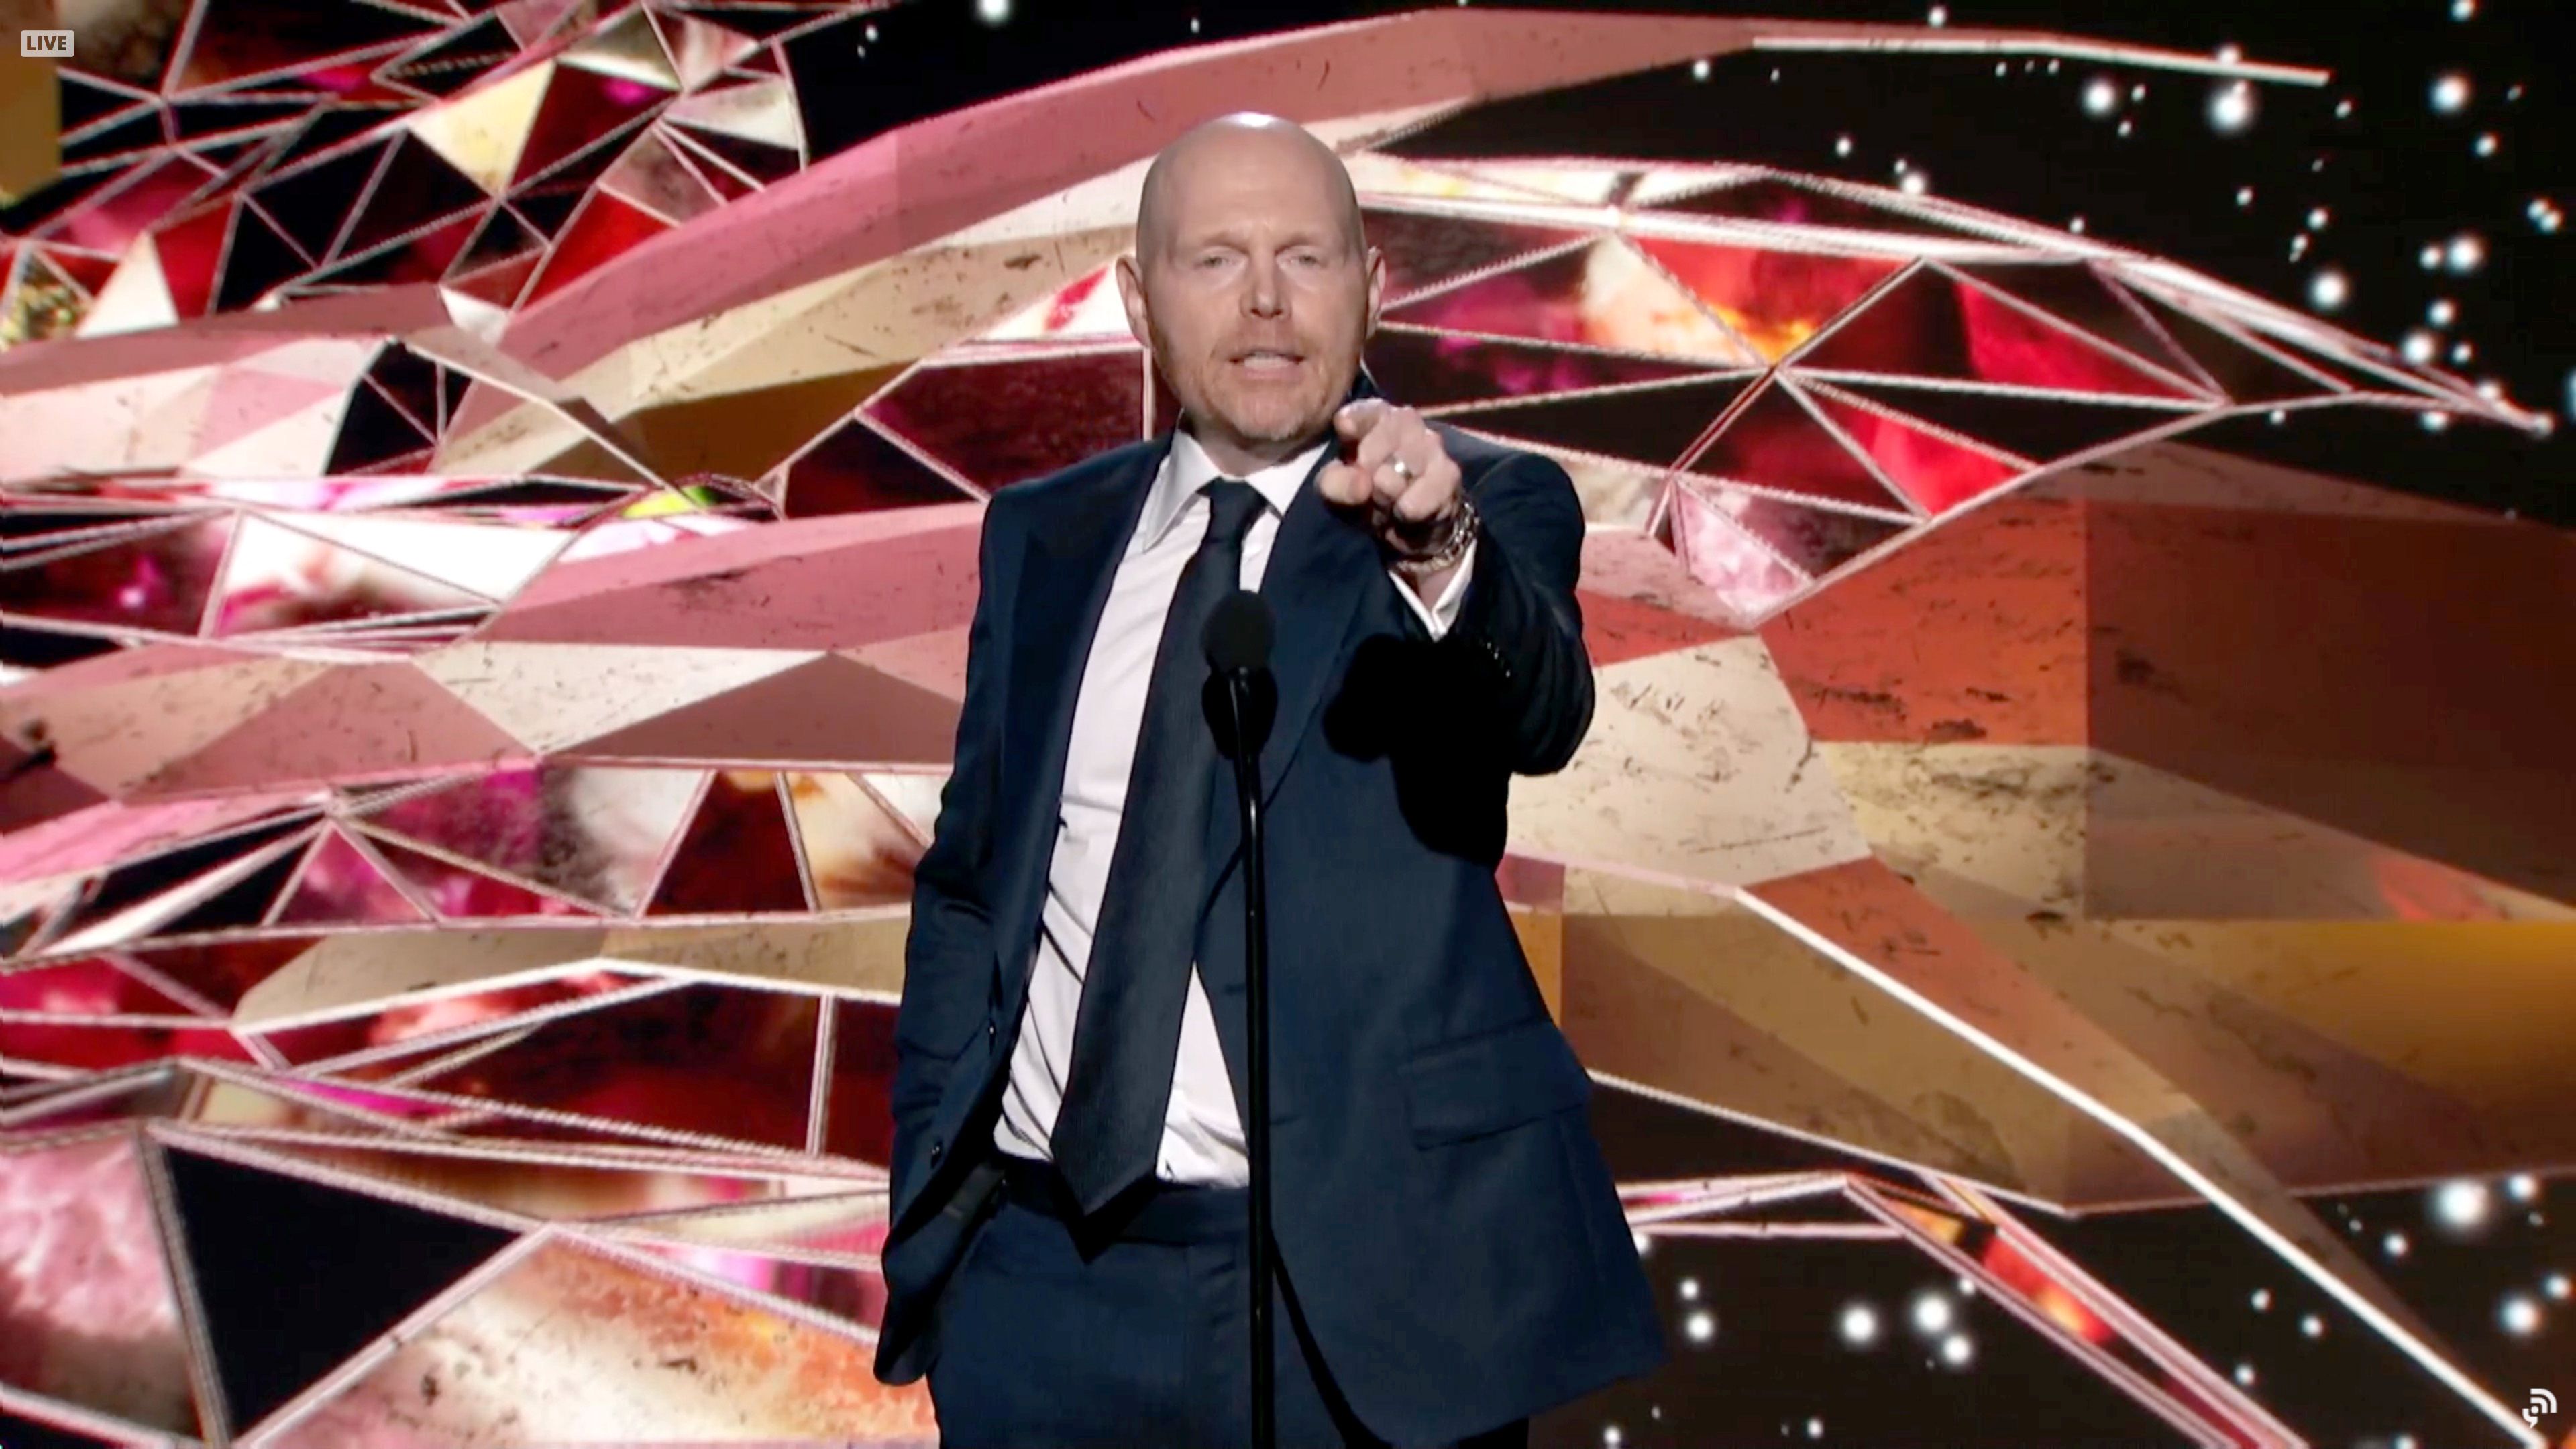 Bill Burr hosted the 2021 Grammys pre-show and caused controversy for his jokes.